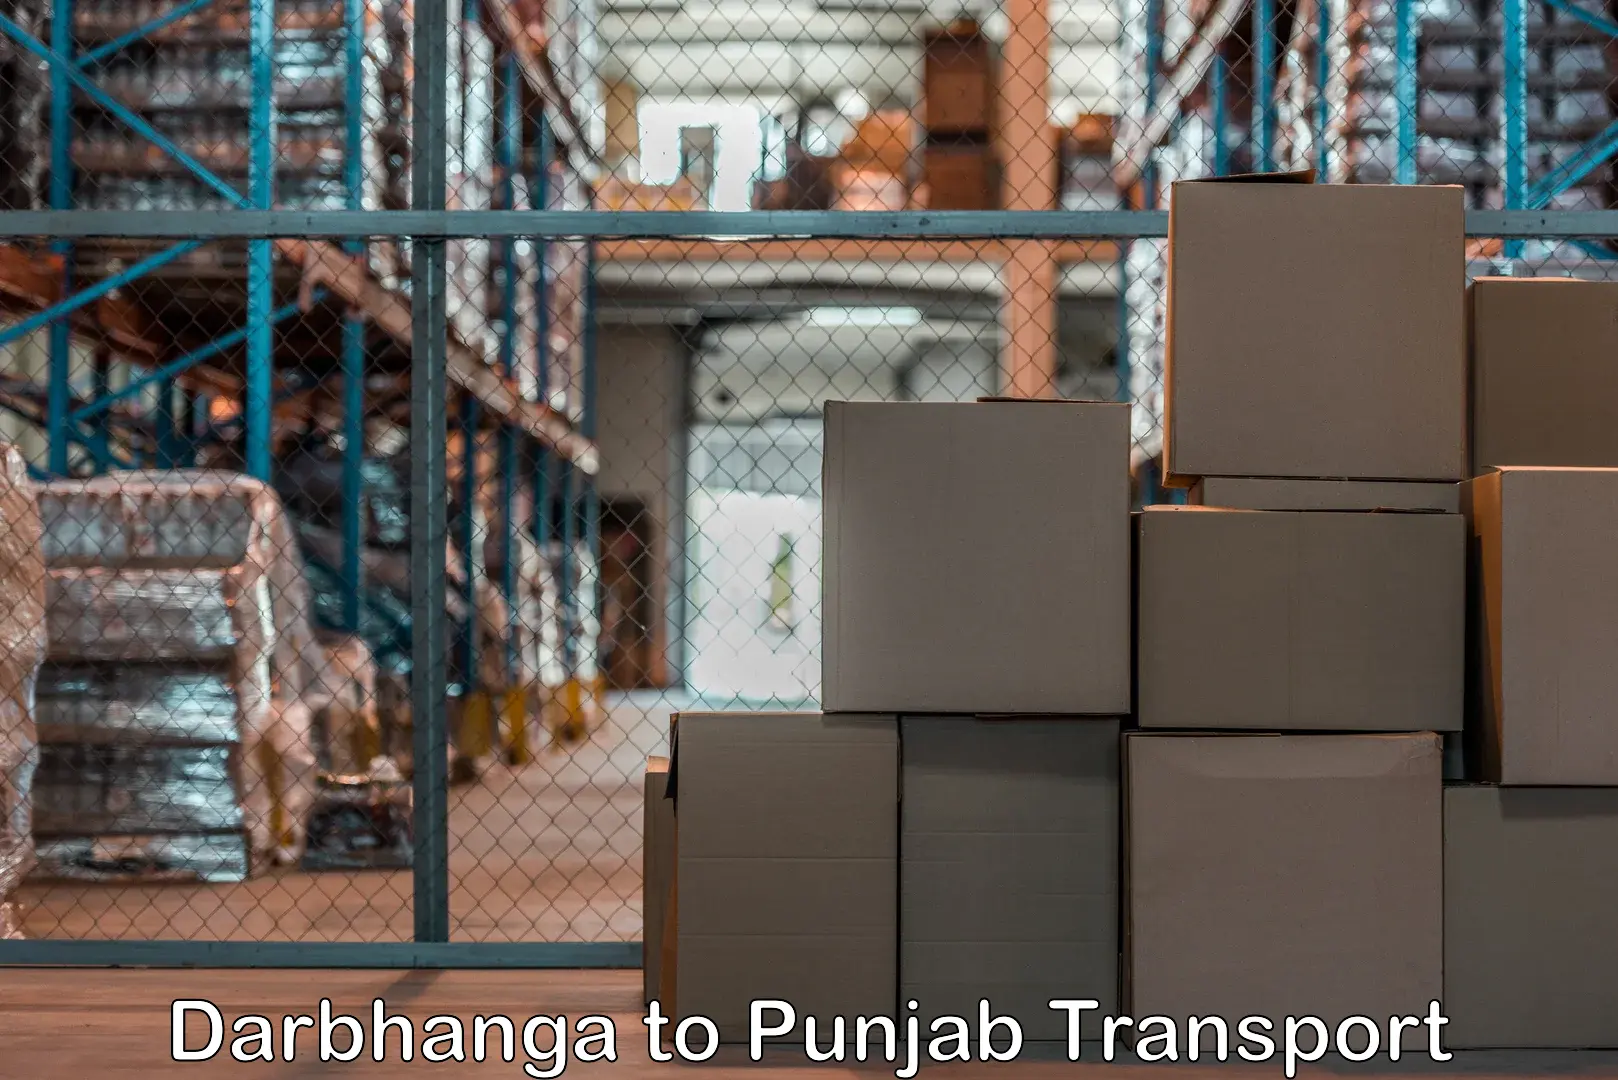 Road transport services in Darbhanga to Jagraon